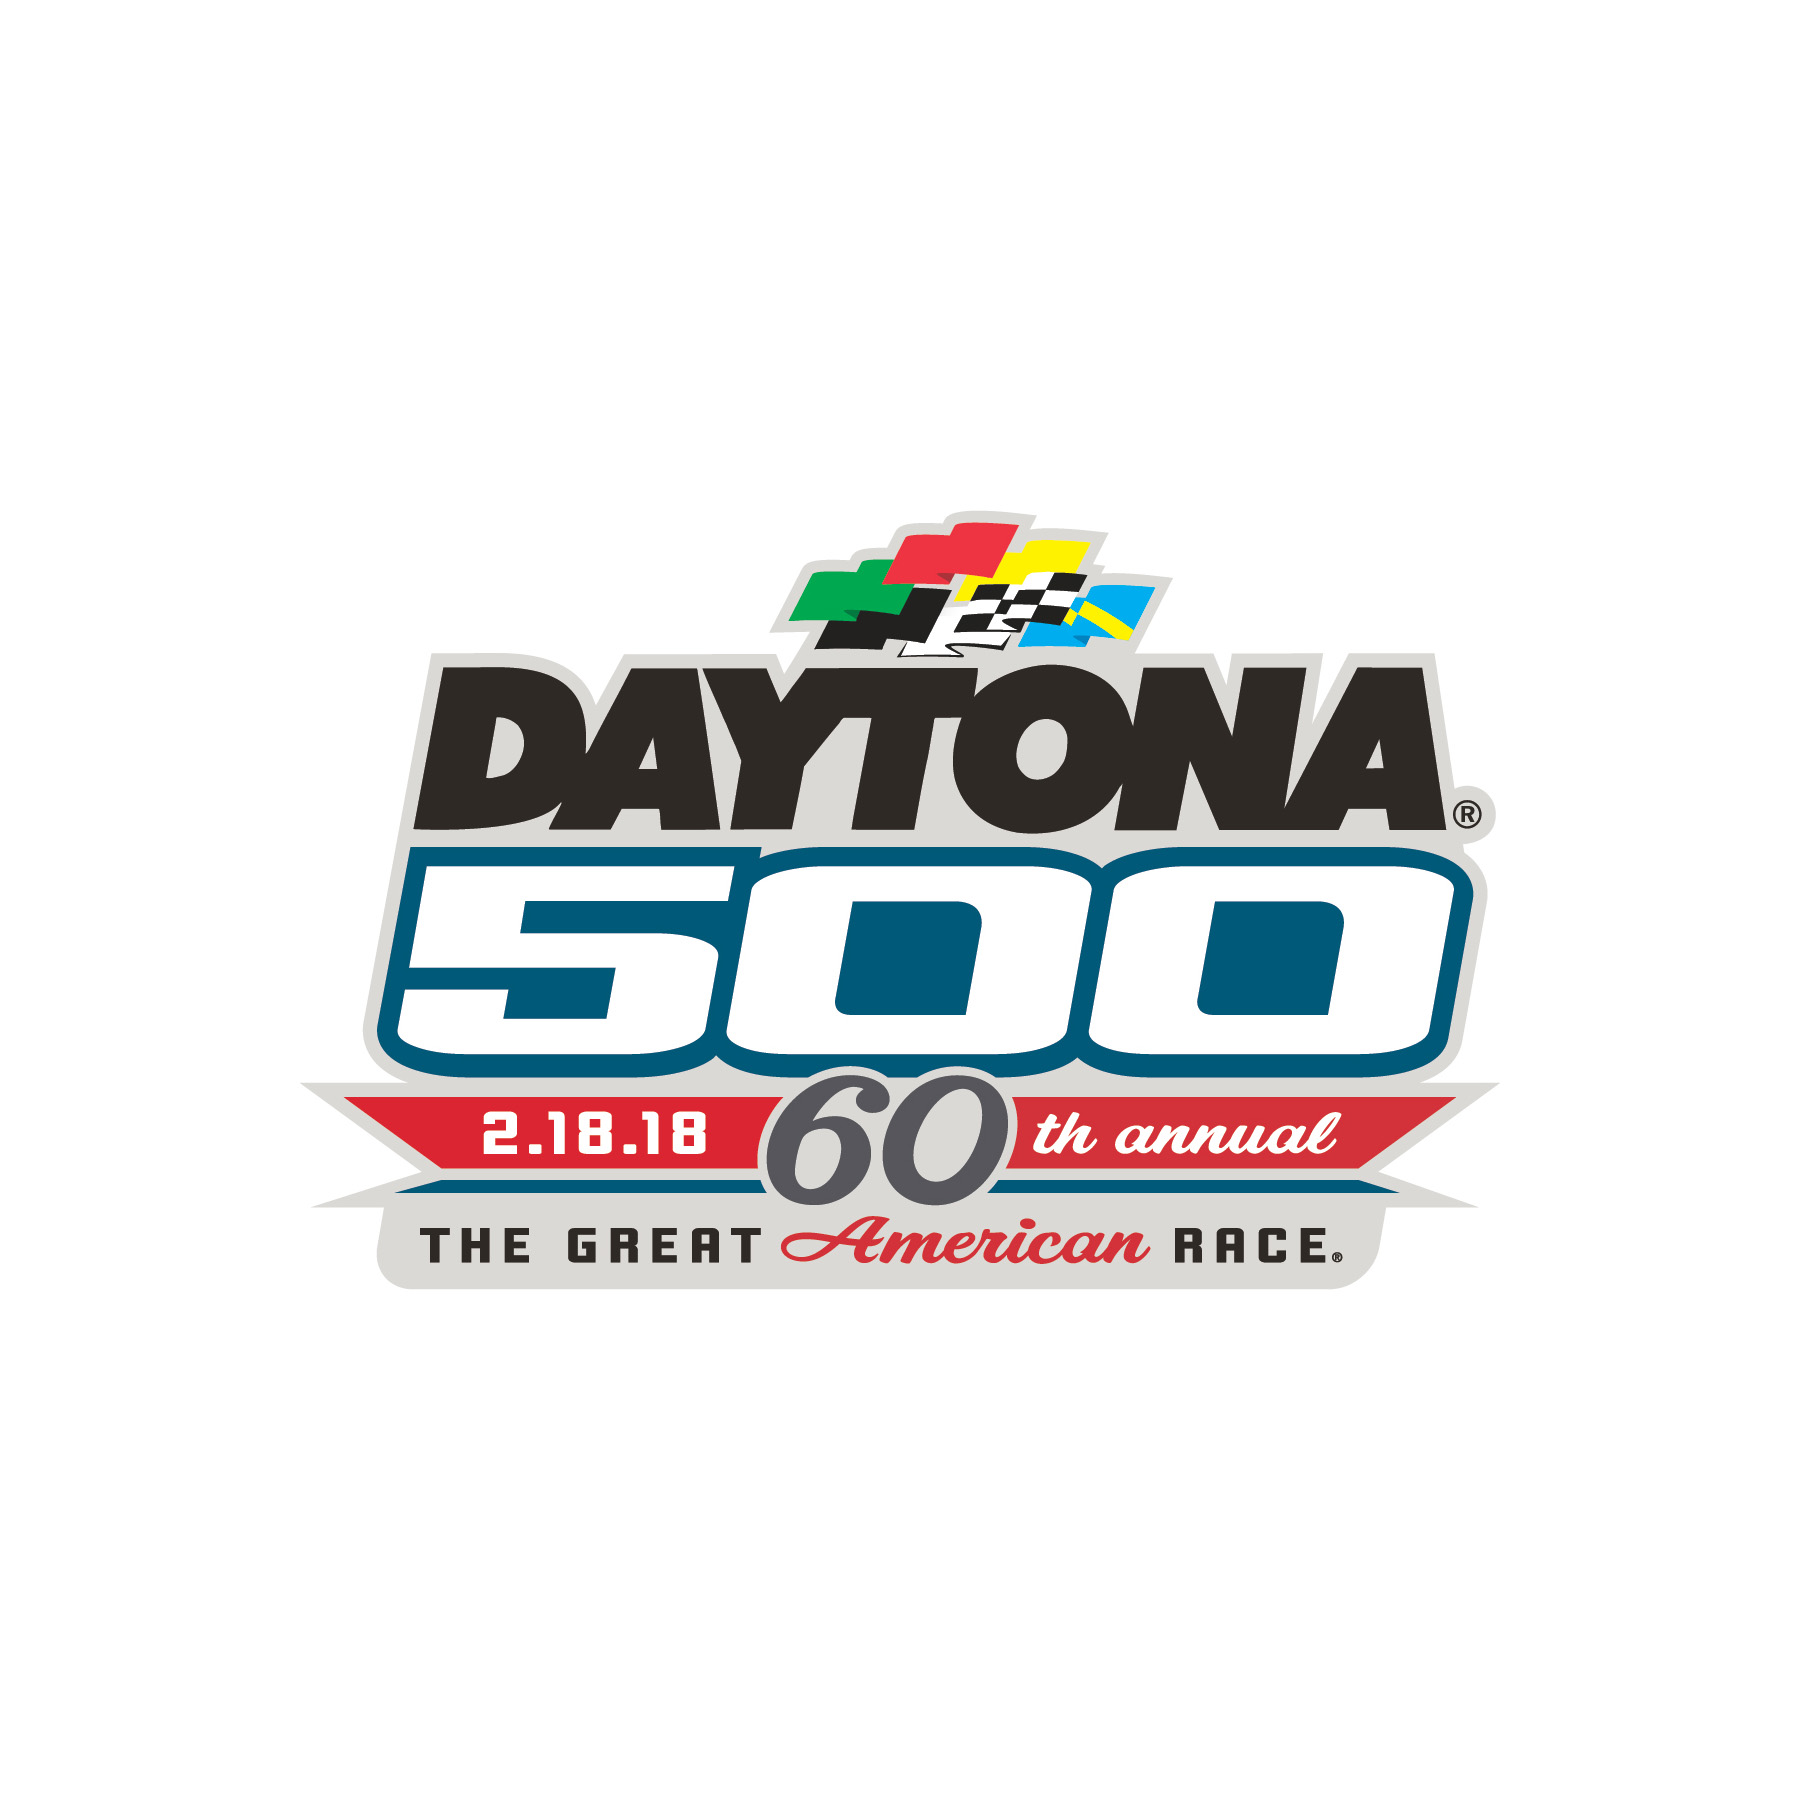 Daytona 500, Race Date, Start Time and viewing options for The Great